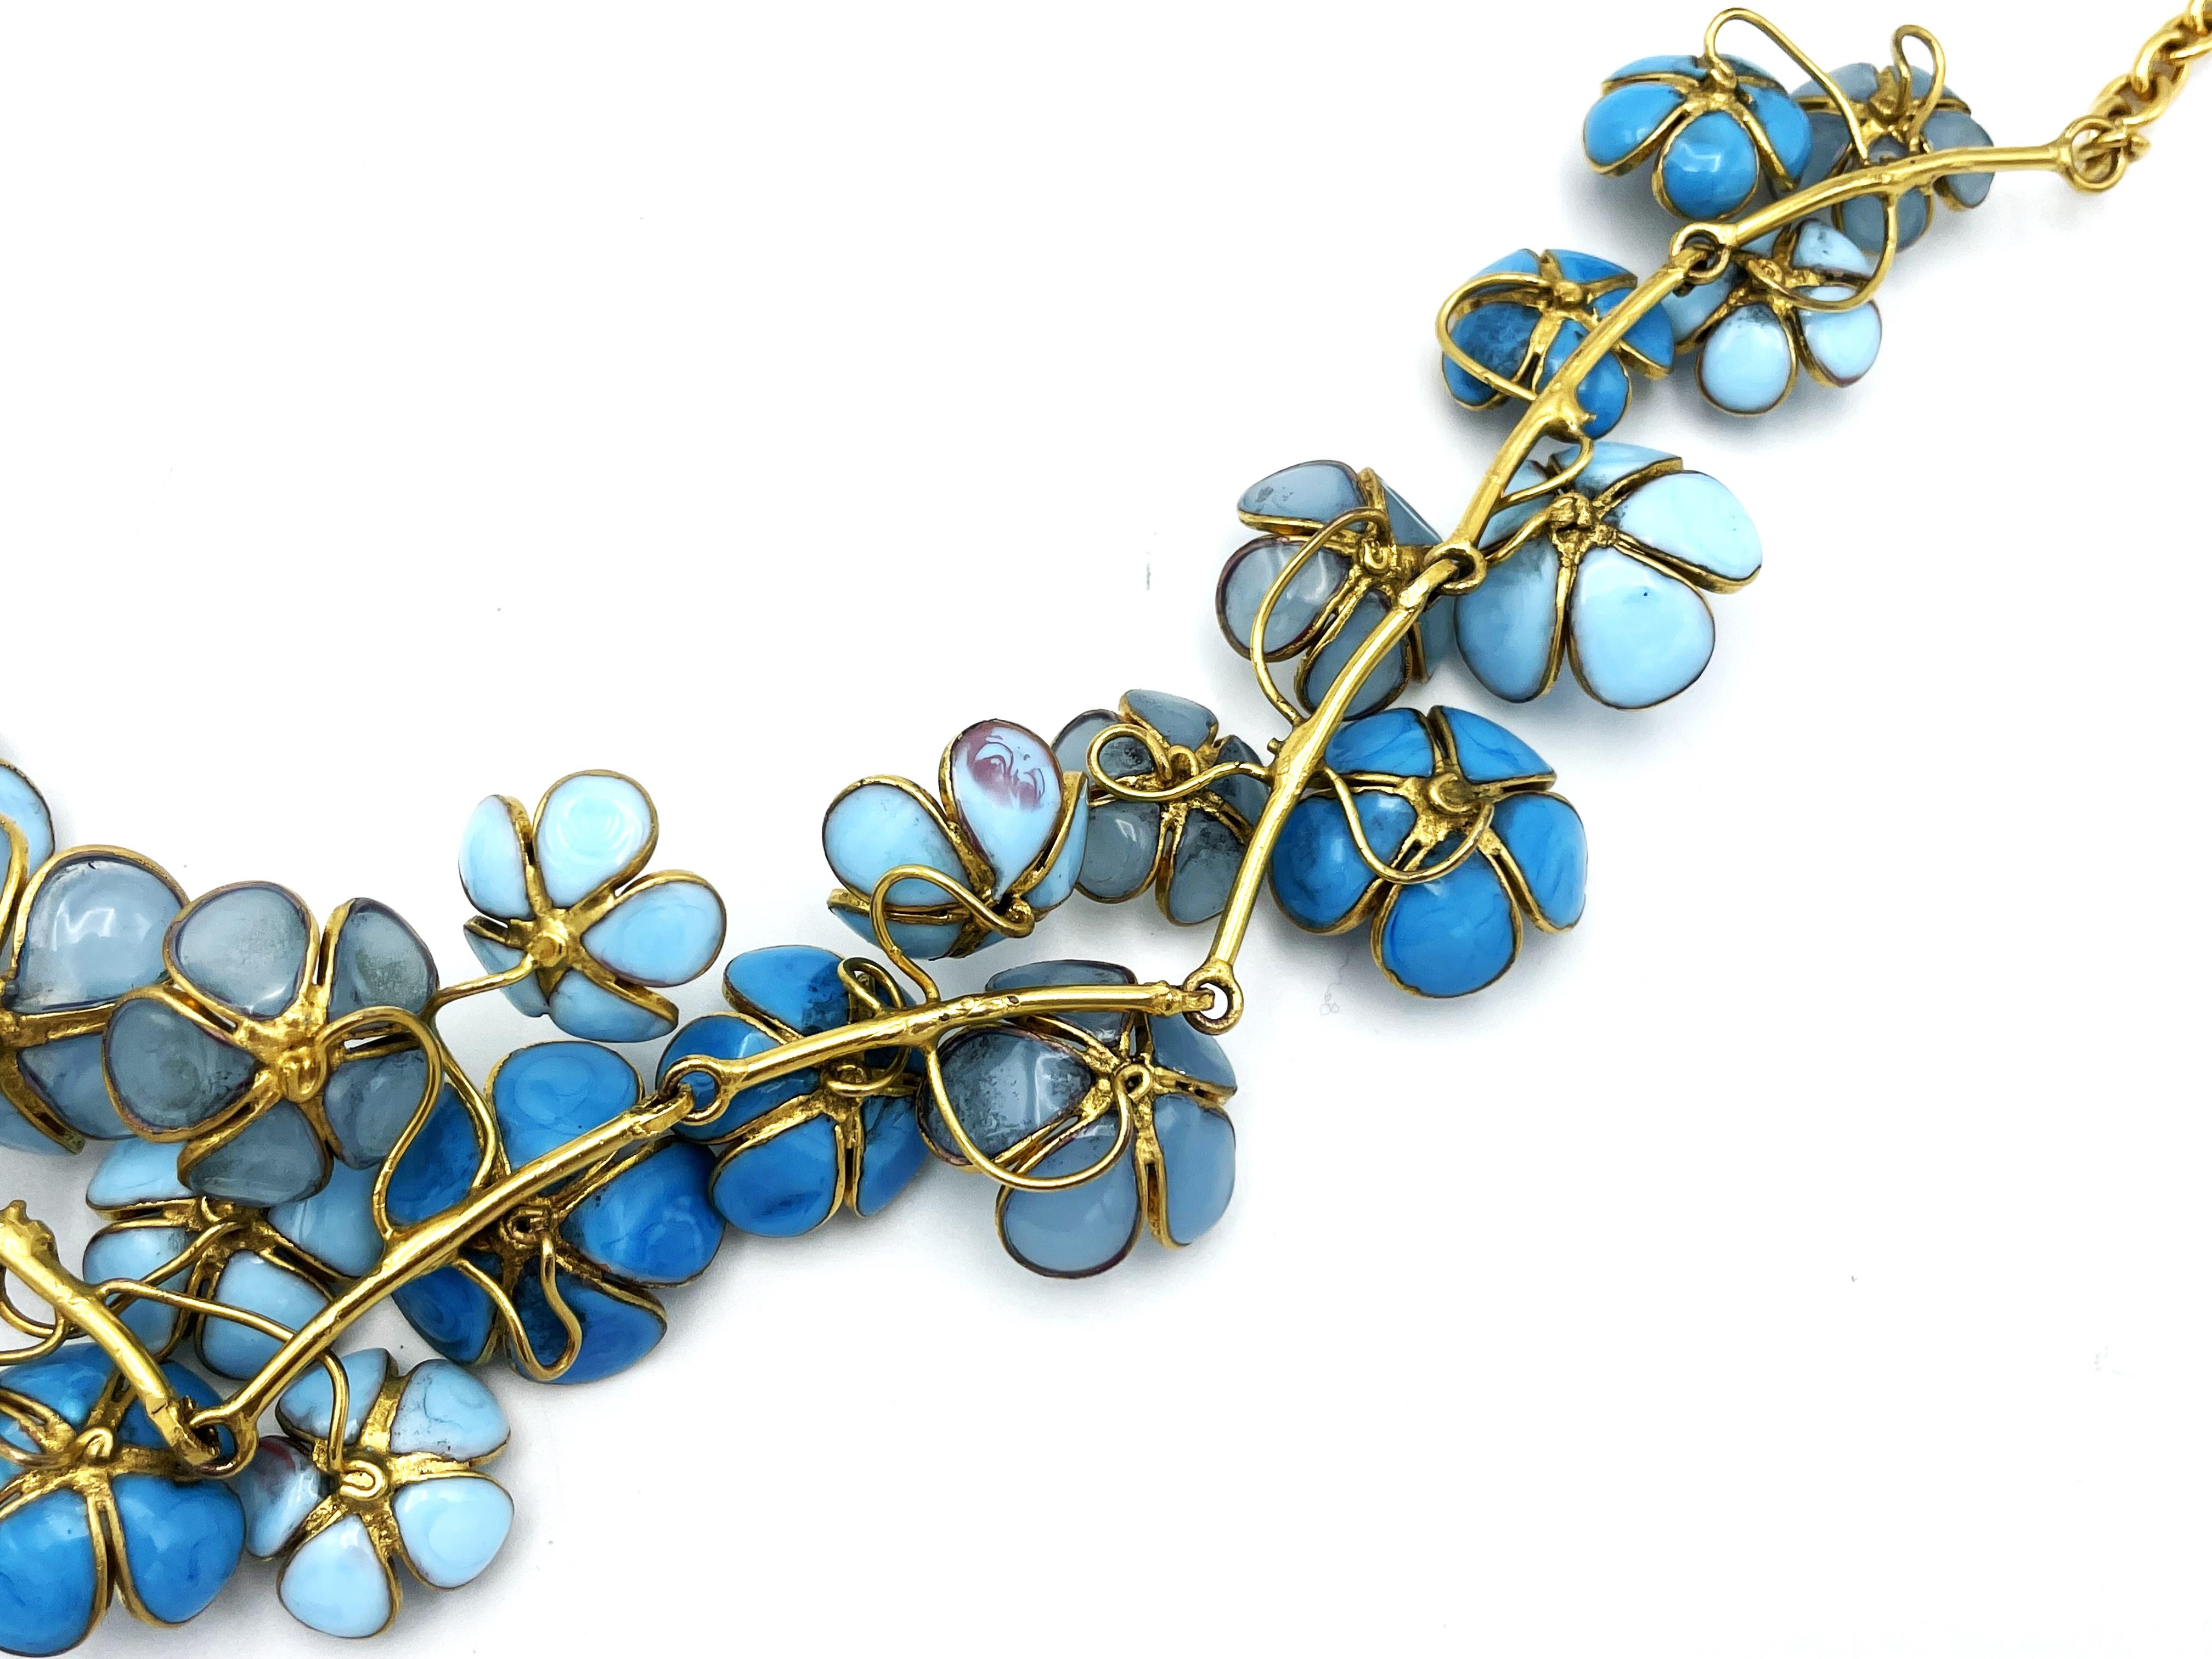 Necklace of many blue glass flowers from Gripoix in the style of Chanel For Sale 3